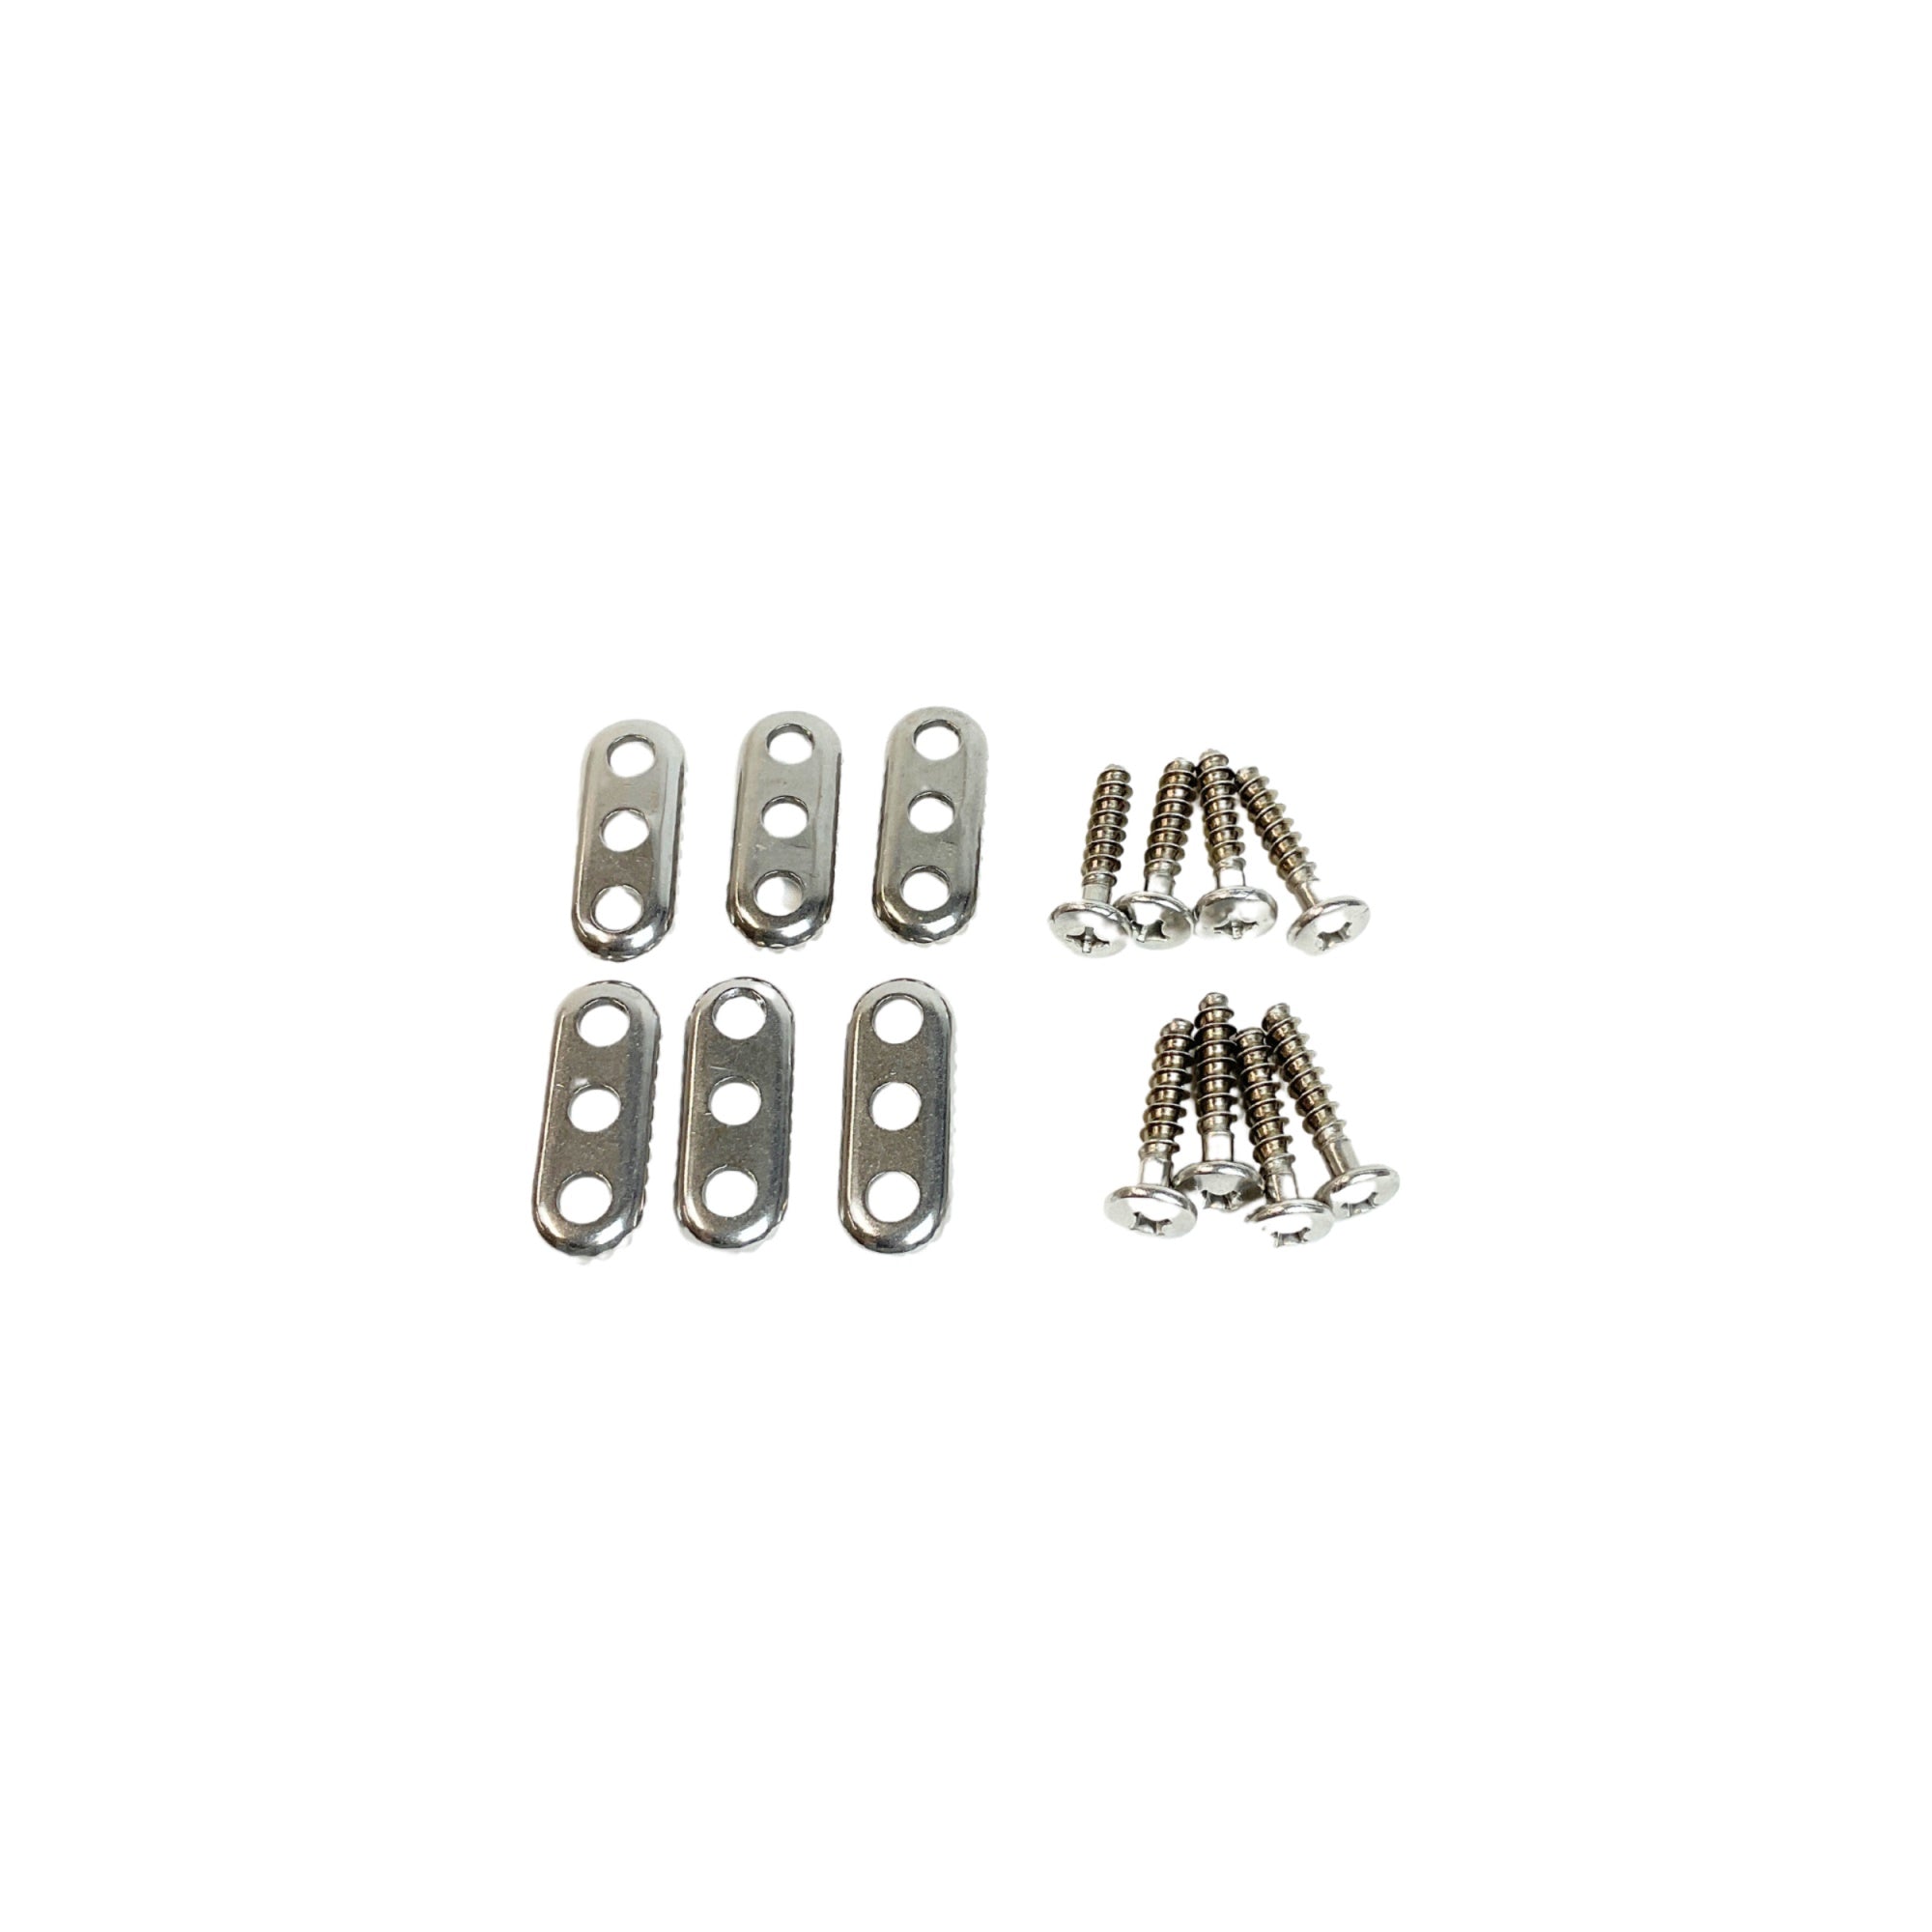 Duotone Screw Set incl. Washer for Footstraps (8pcs) 2024 - Worthing Watersports - 9010583192796 - DT Spareparts - Duotone X